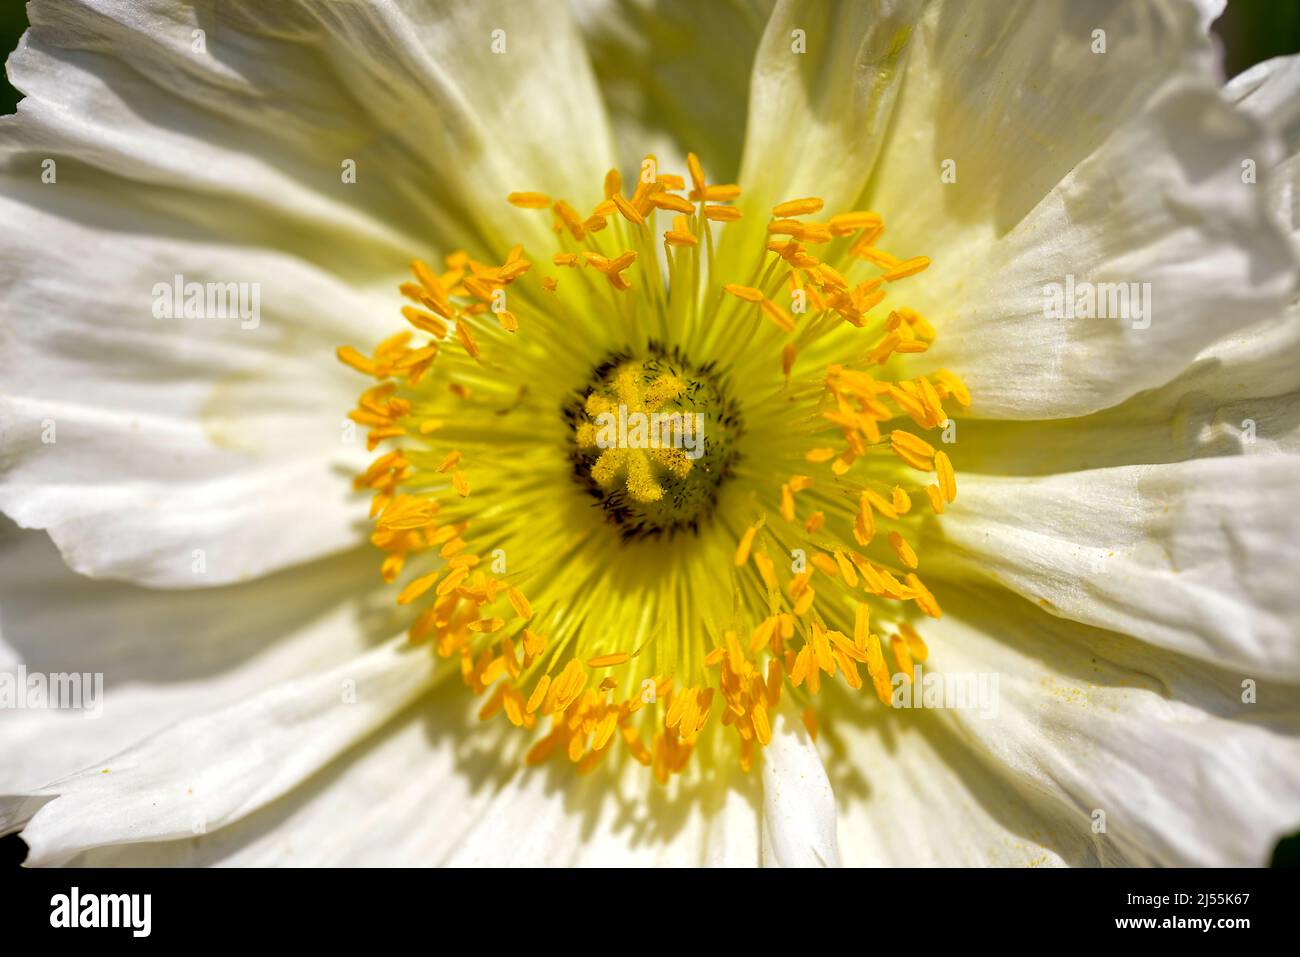 Macro of white papaver flower with yellow stamens and pistil seen from above Stock Photo